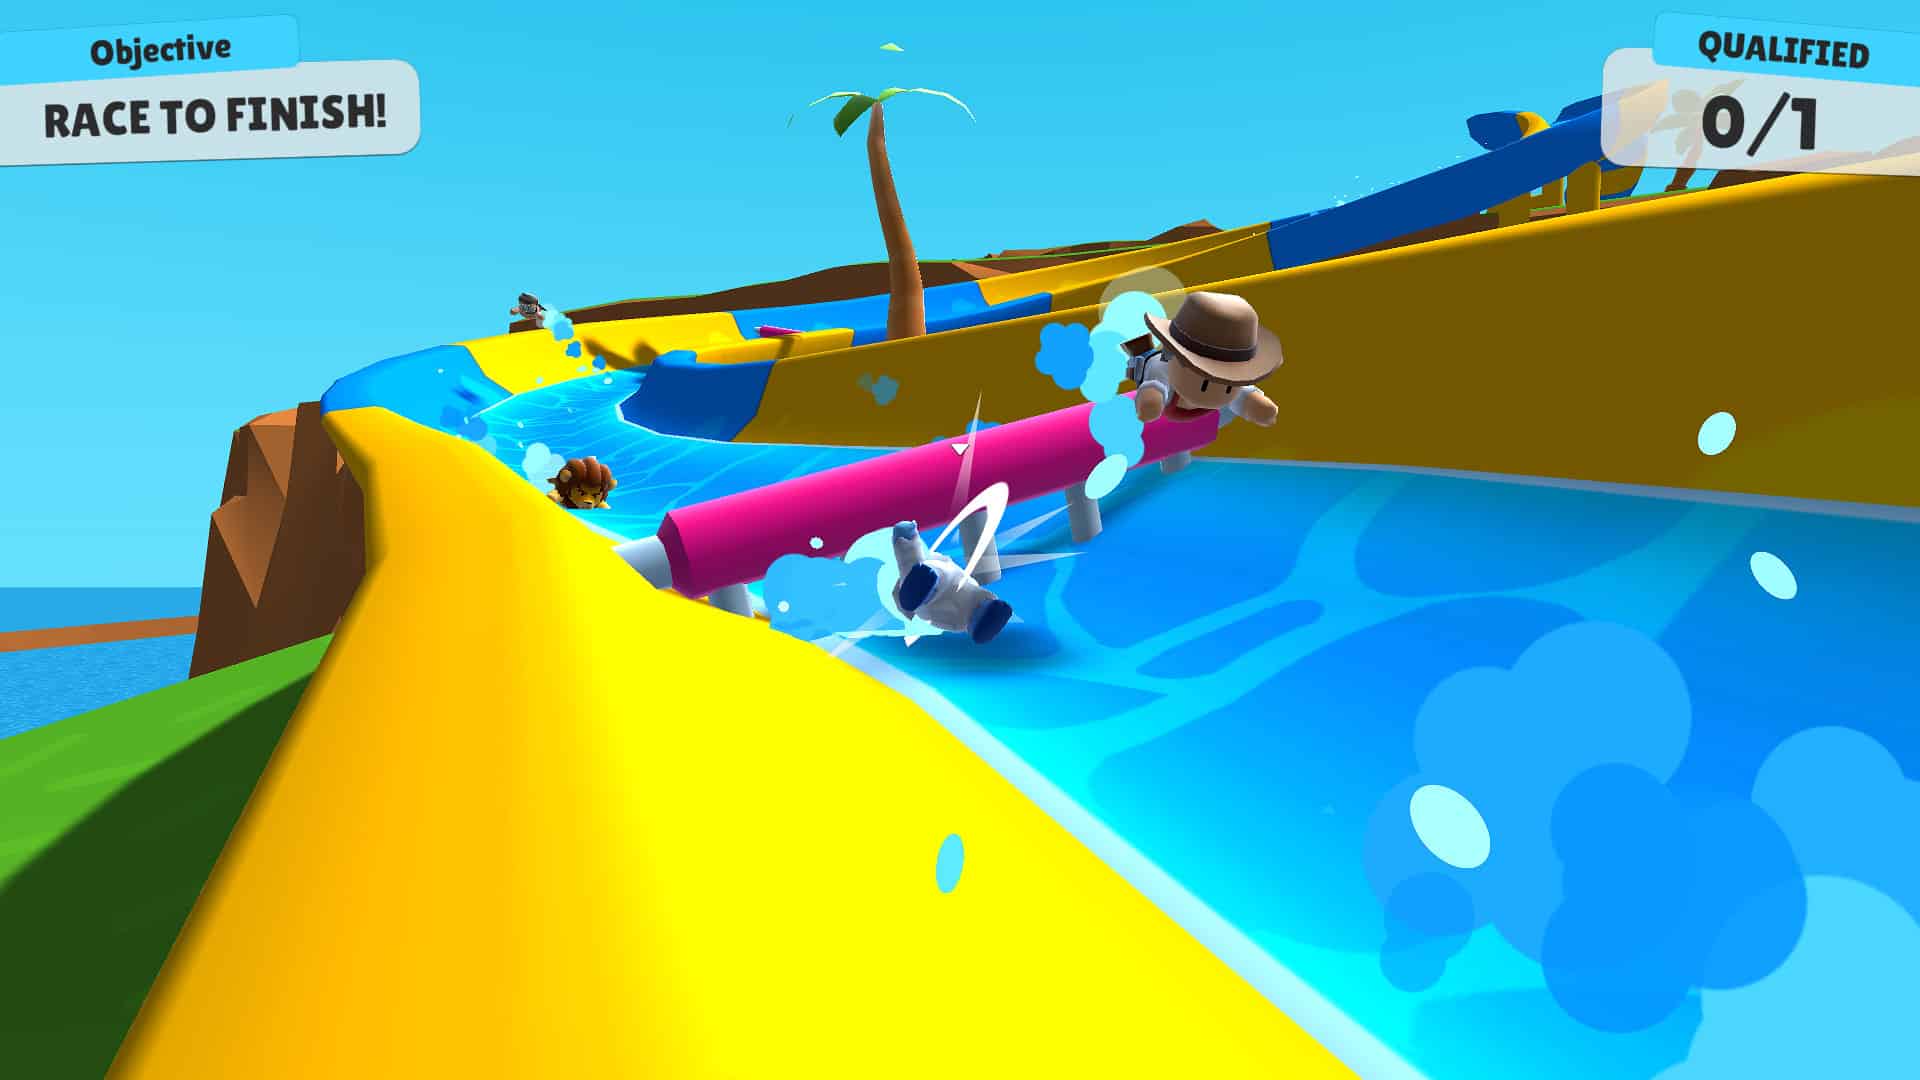 Players sliding on a water slide in Stumble Guys